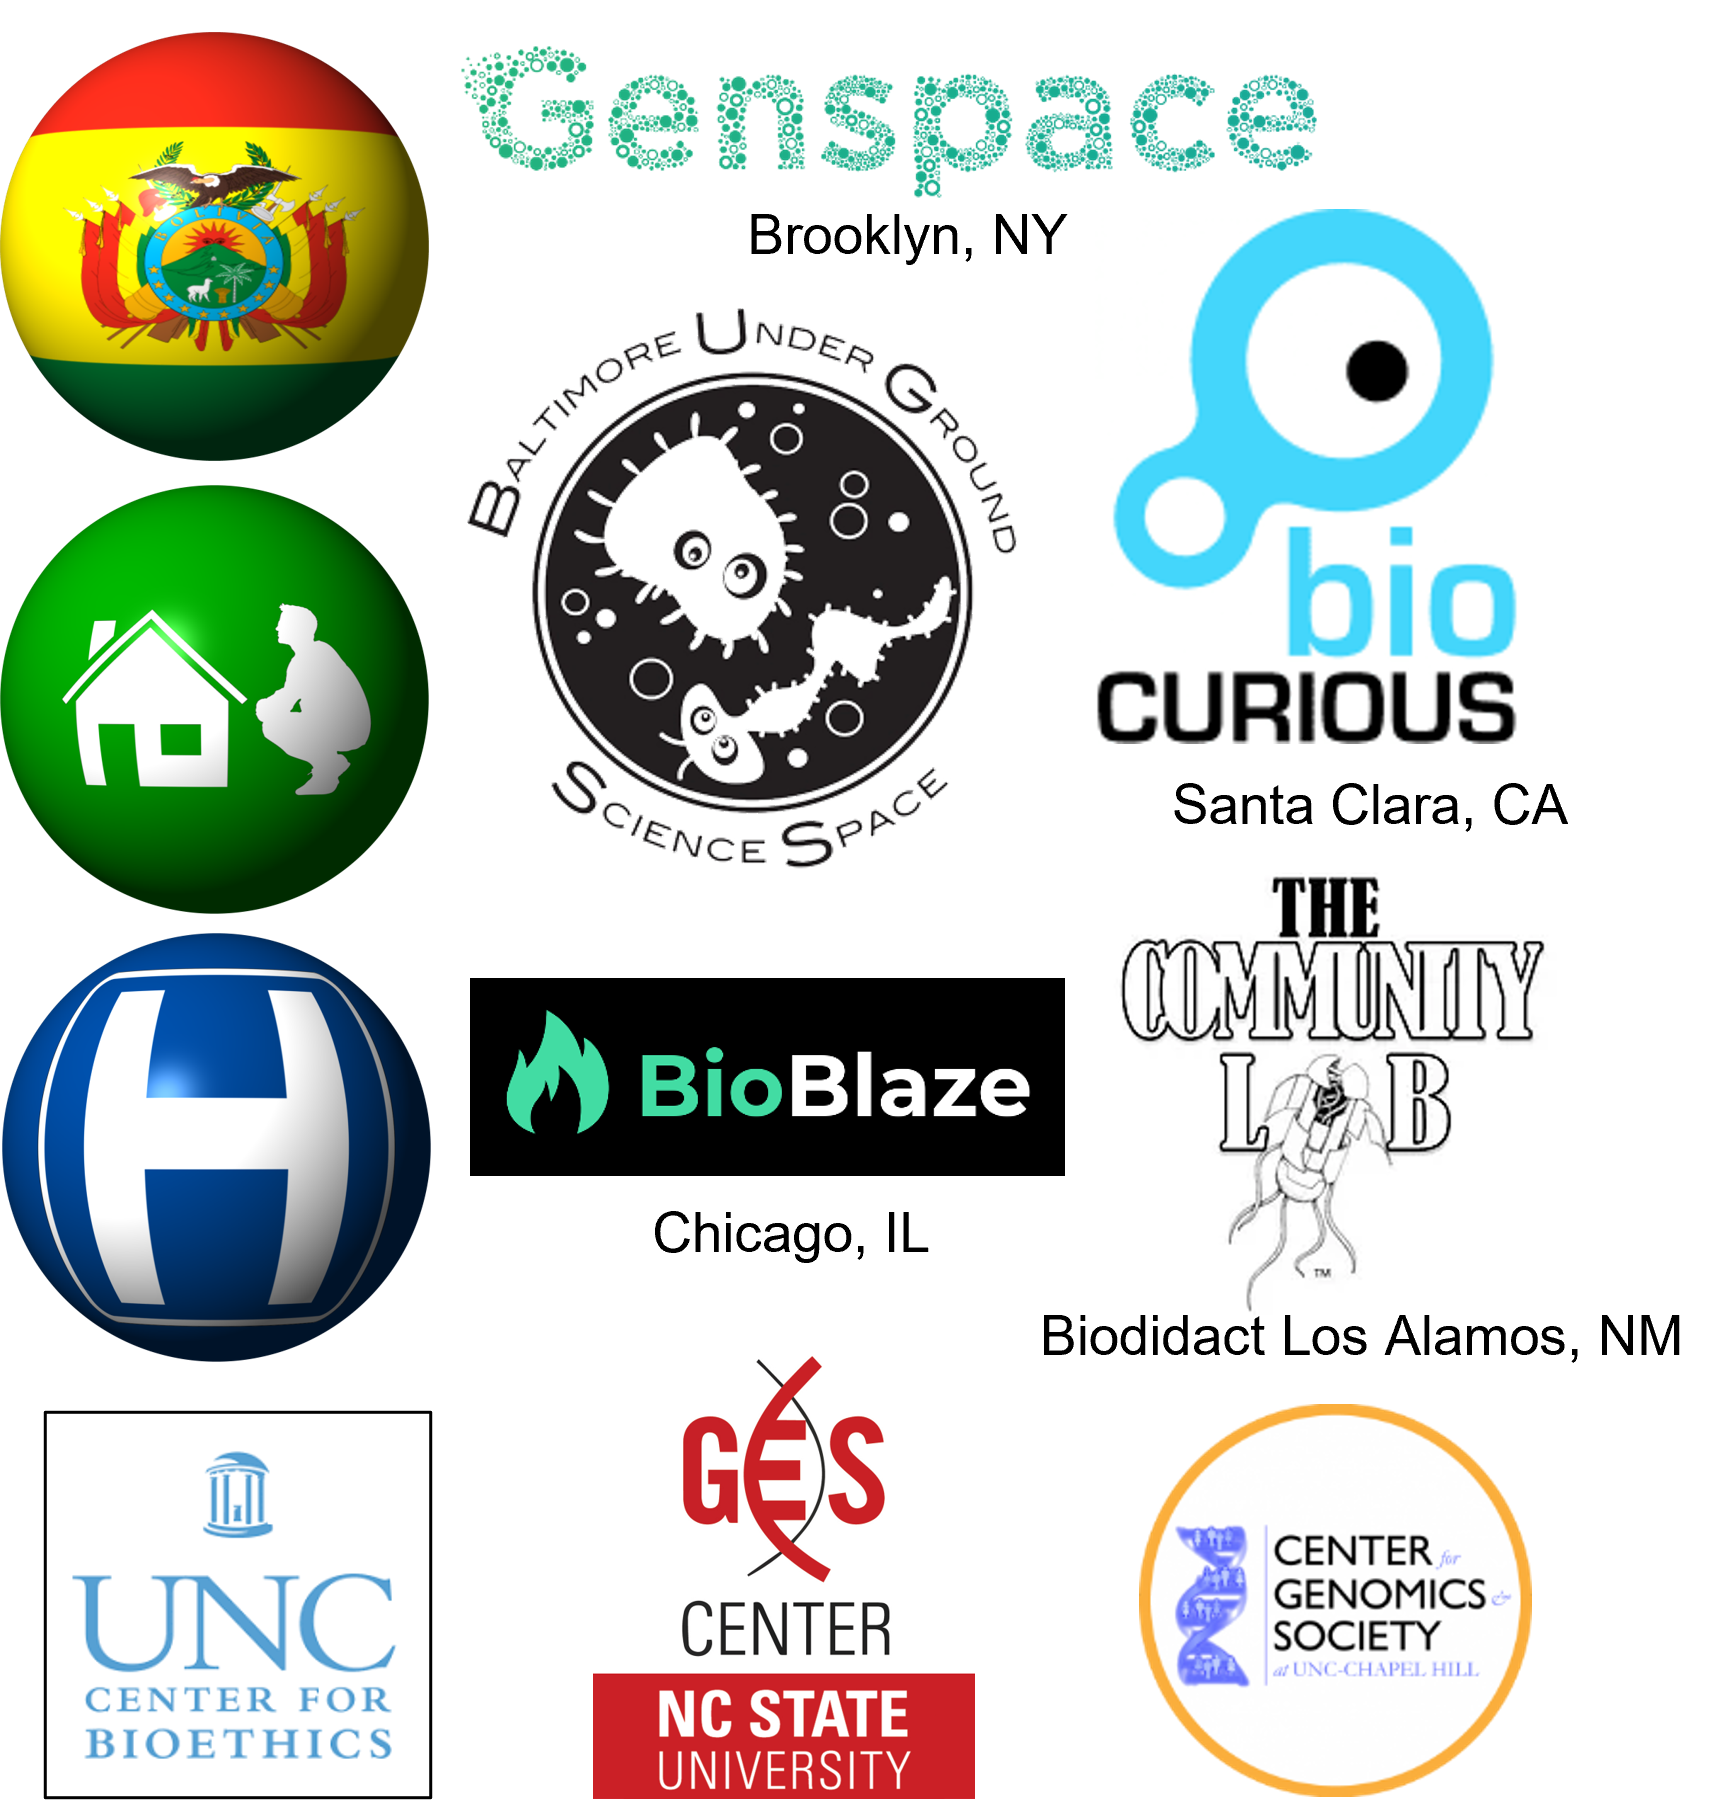 Partner logos - UNC Center for Bioethics, GES Center NC State, Center for Genomics and Society, Genspace, biocurious, baltimore under ground science space, BioBlaze, The Community Lab (Biodidact Los Alamos, NM)